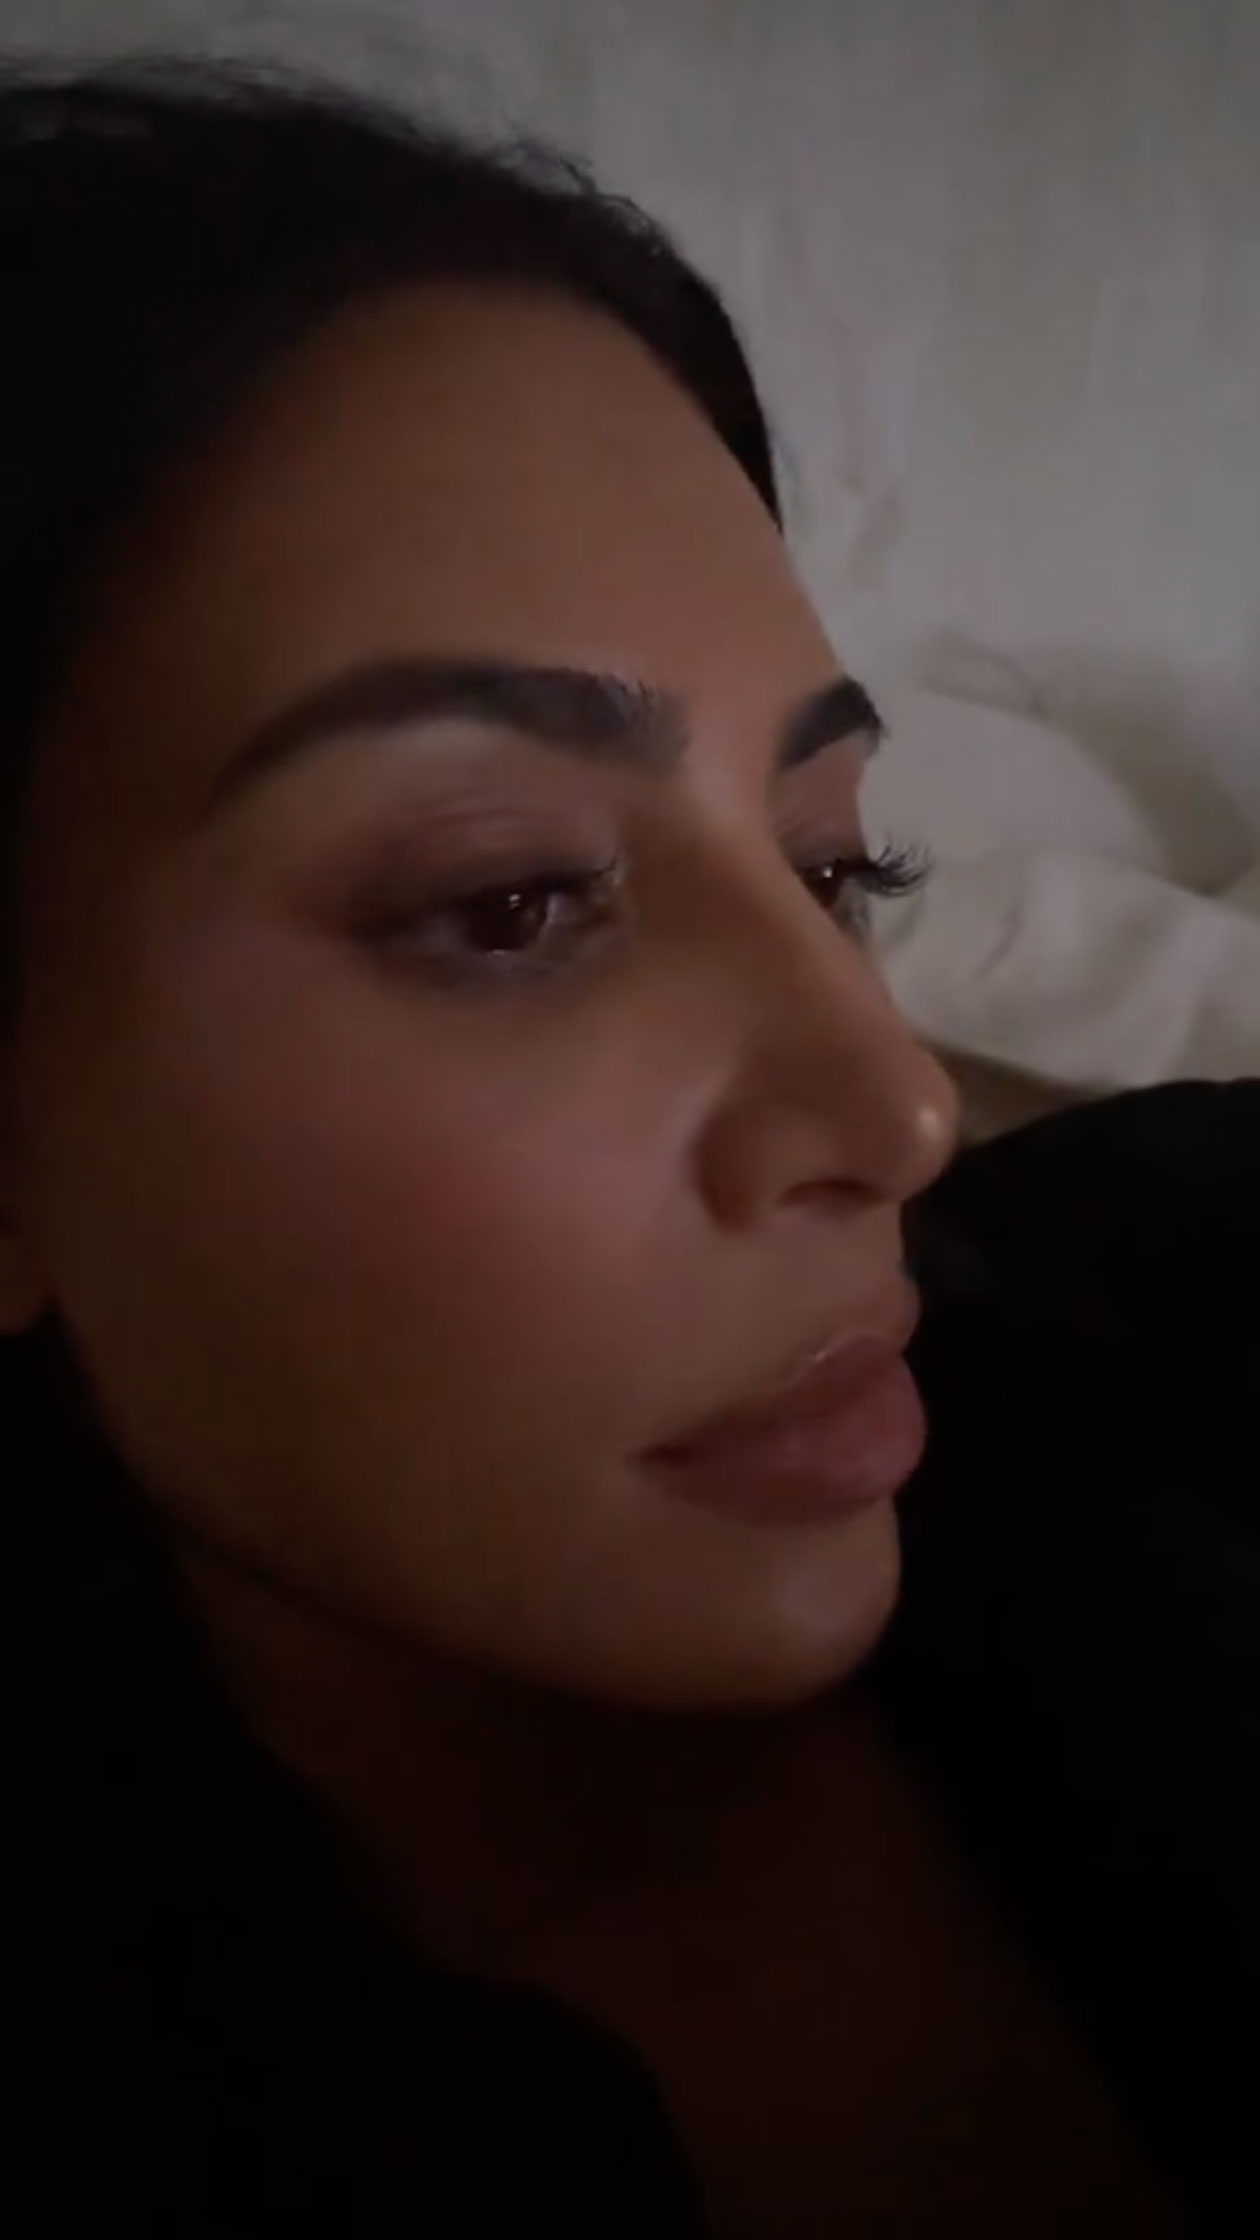 In a recent video, North recorded her mom while she was getting ready for bed